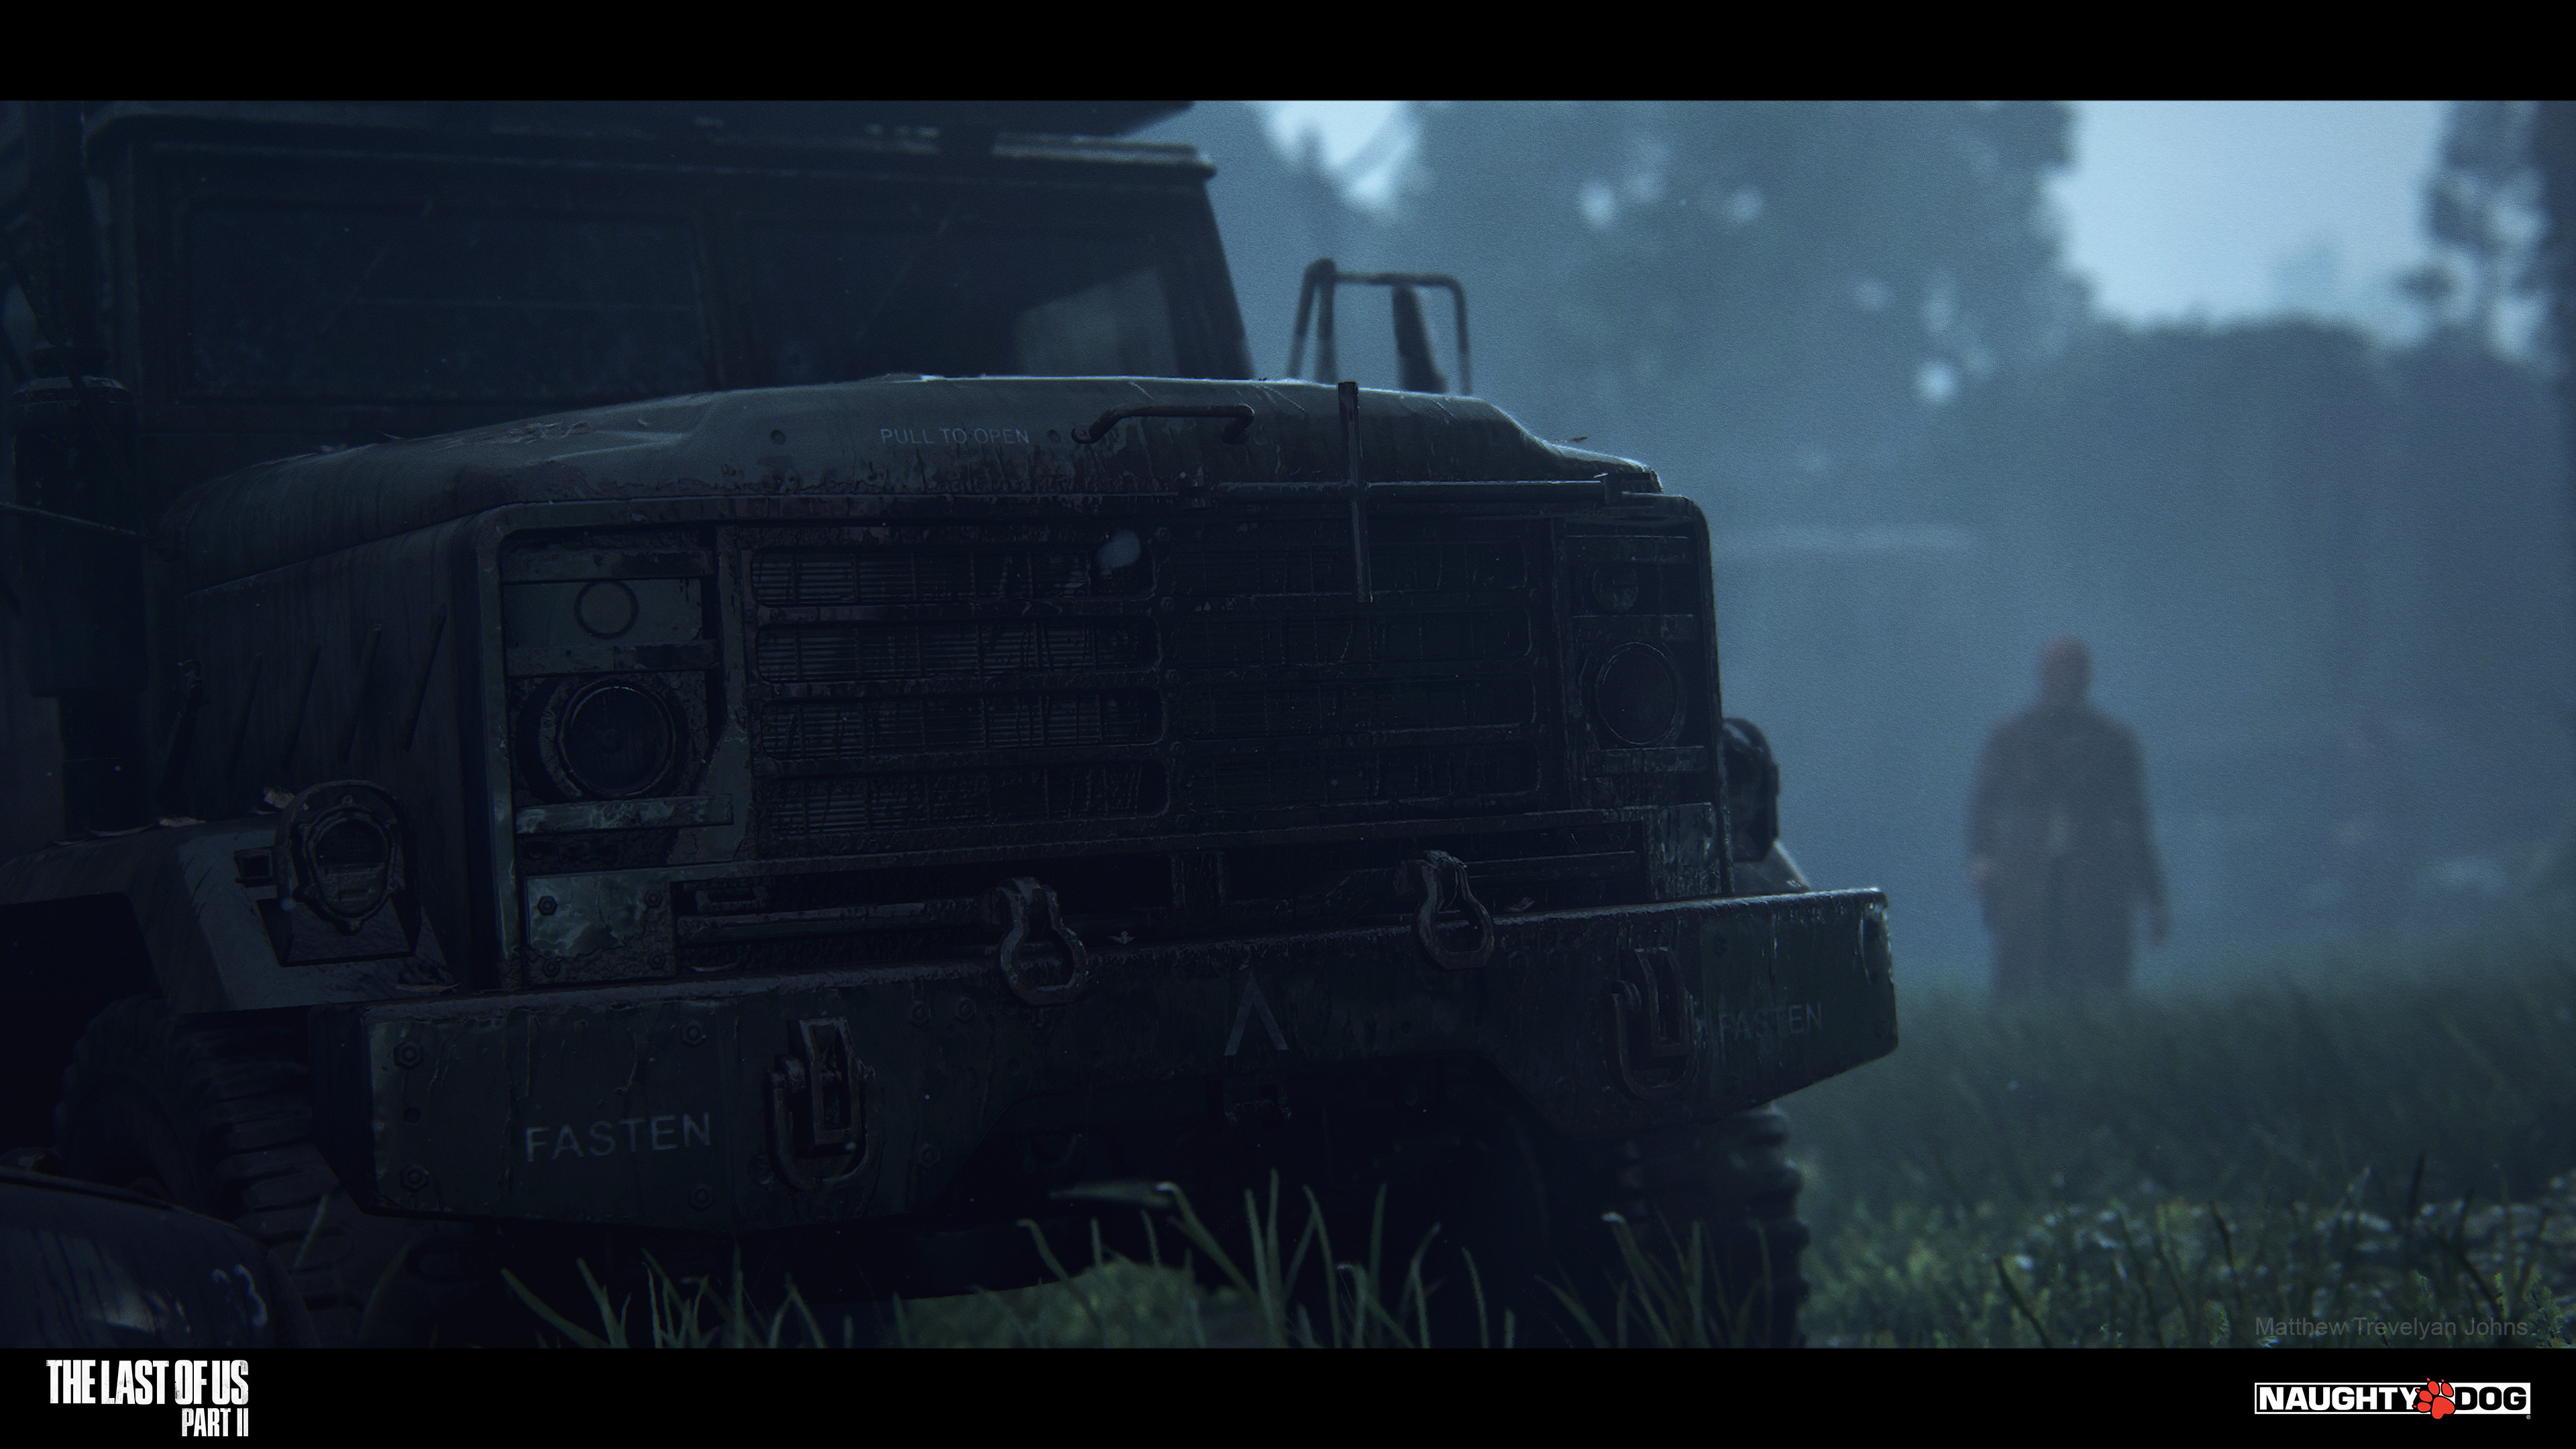 Another image from the E3 demo, Ellie crawled right underneath a version of this truck. The challenges that up-close interaction presented helped inform my model and shader work for the entire game, a really valuable learning experience